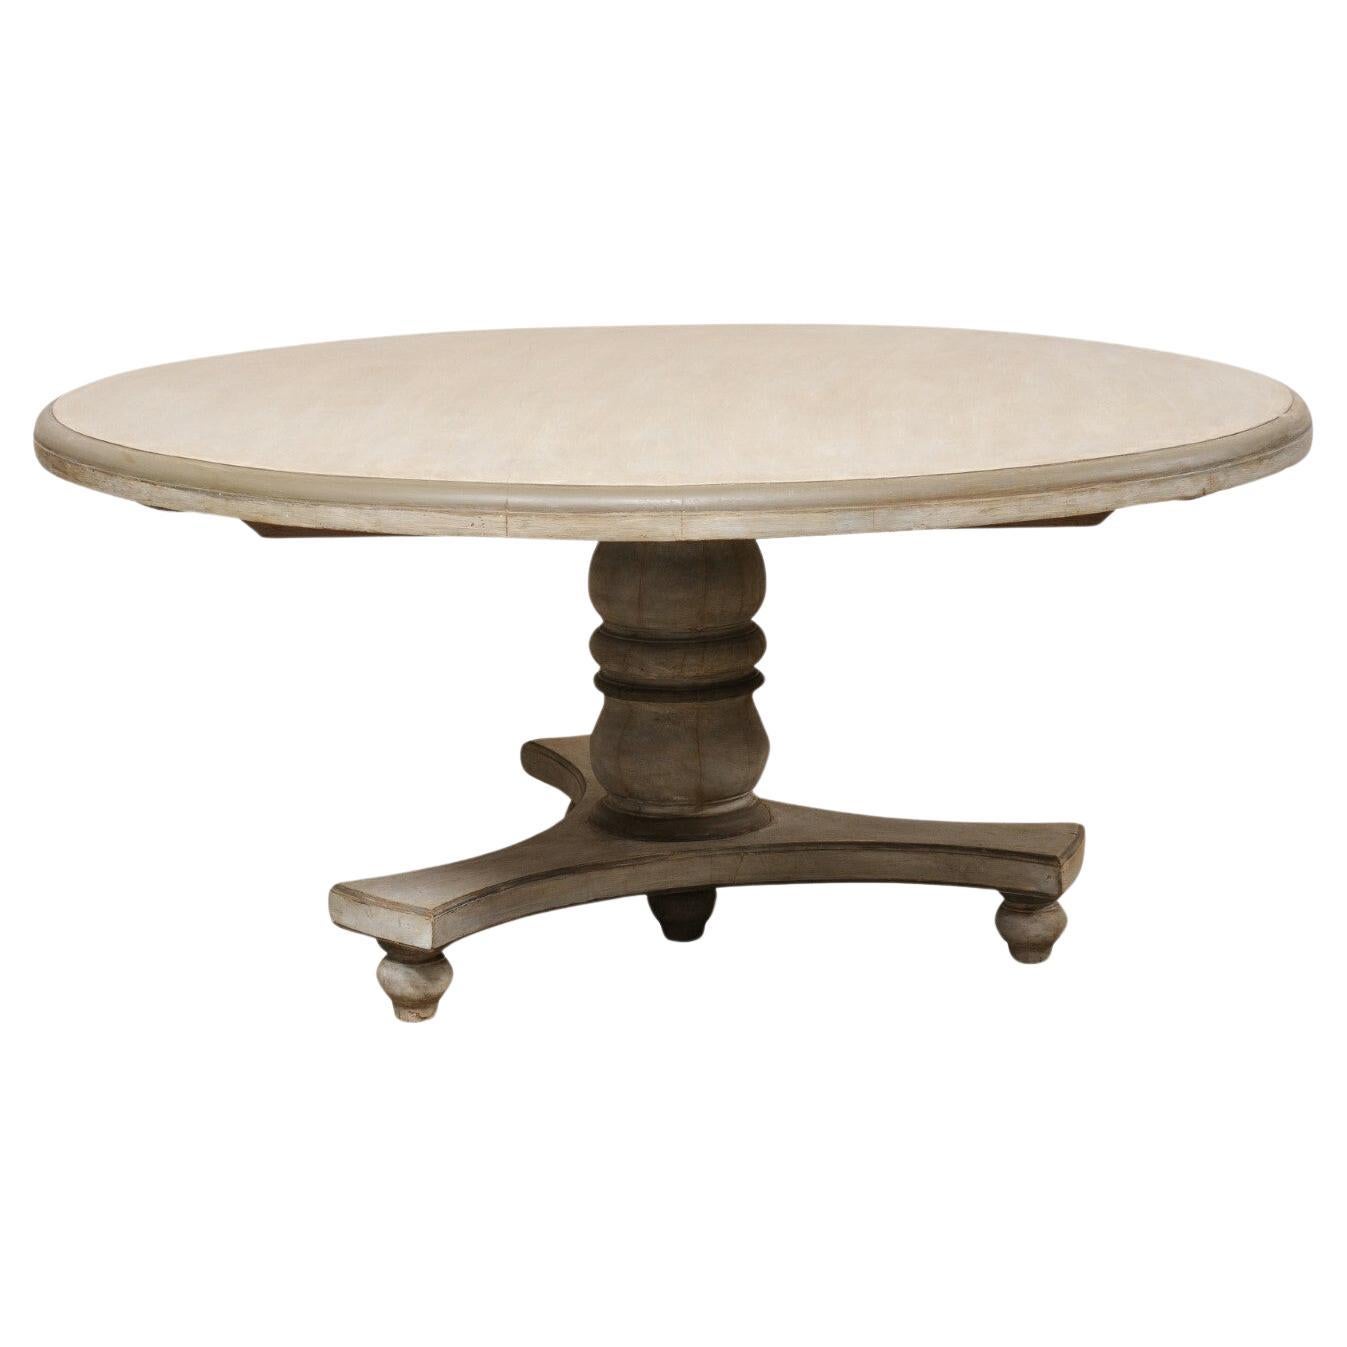 Painted Teak Round-Shaped Pedestal Dining Table, 5.5 Ft Diameter For Sale